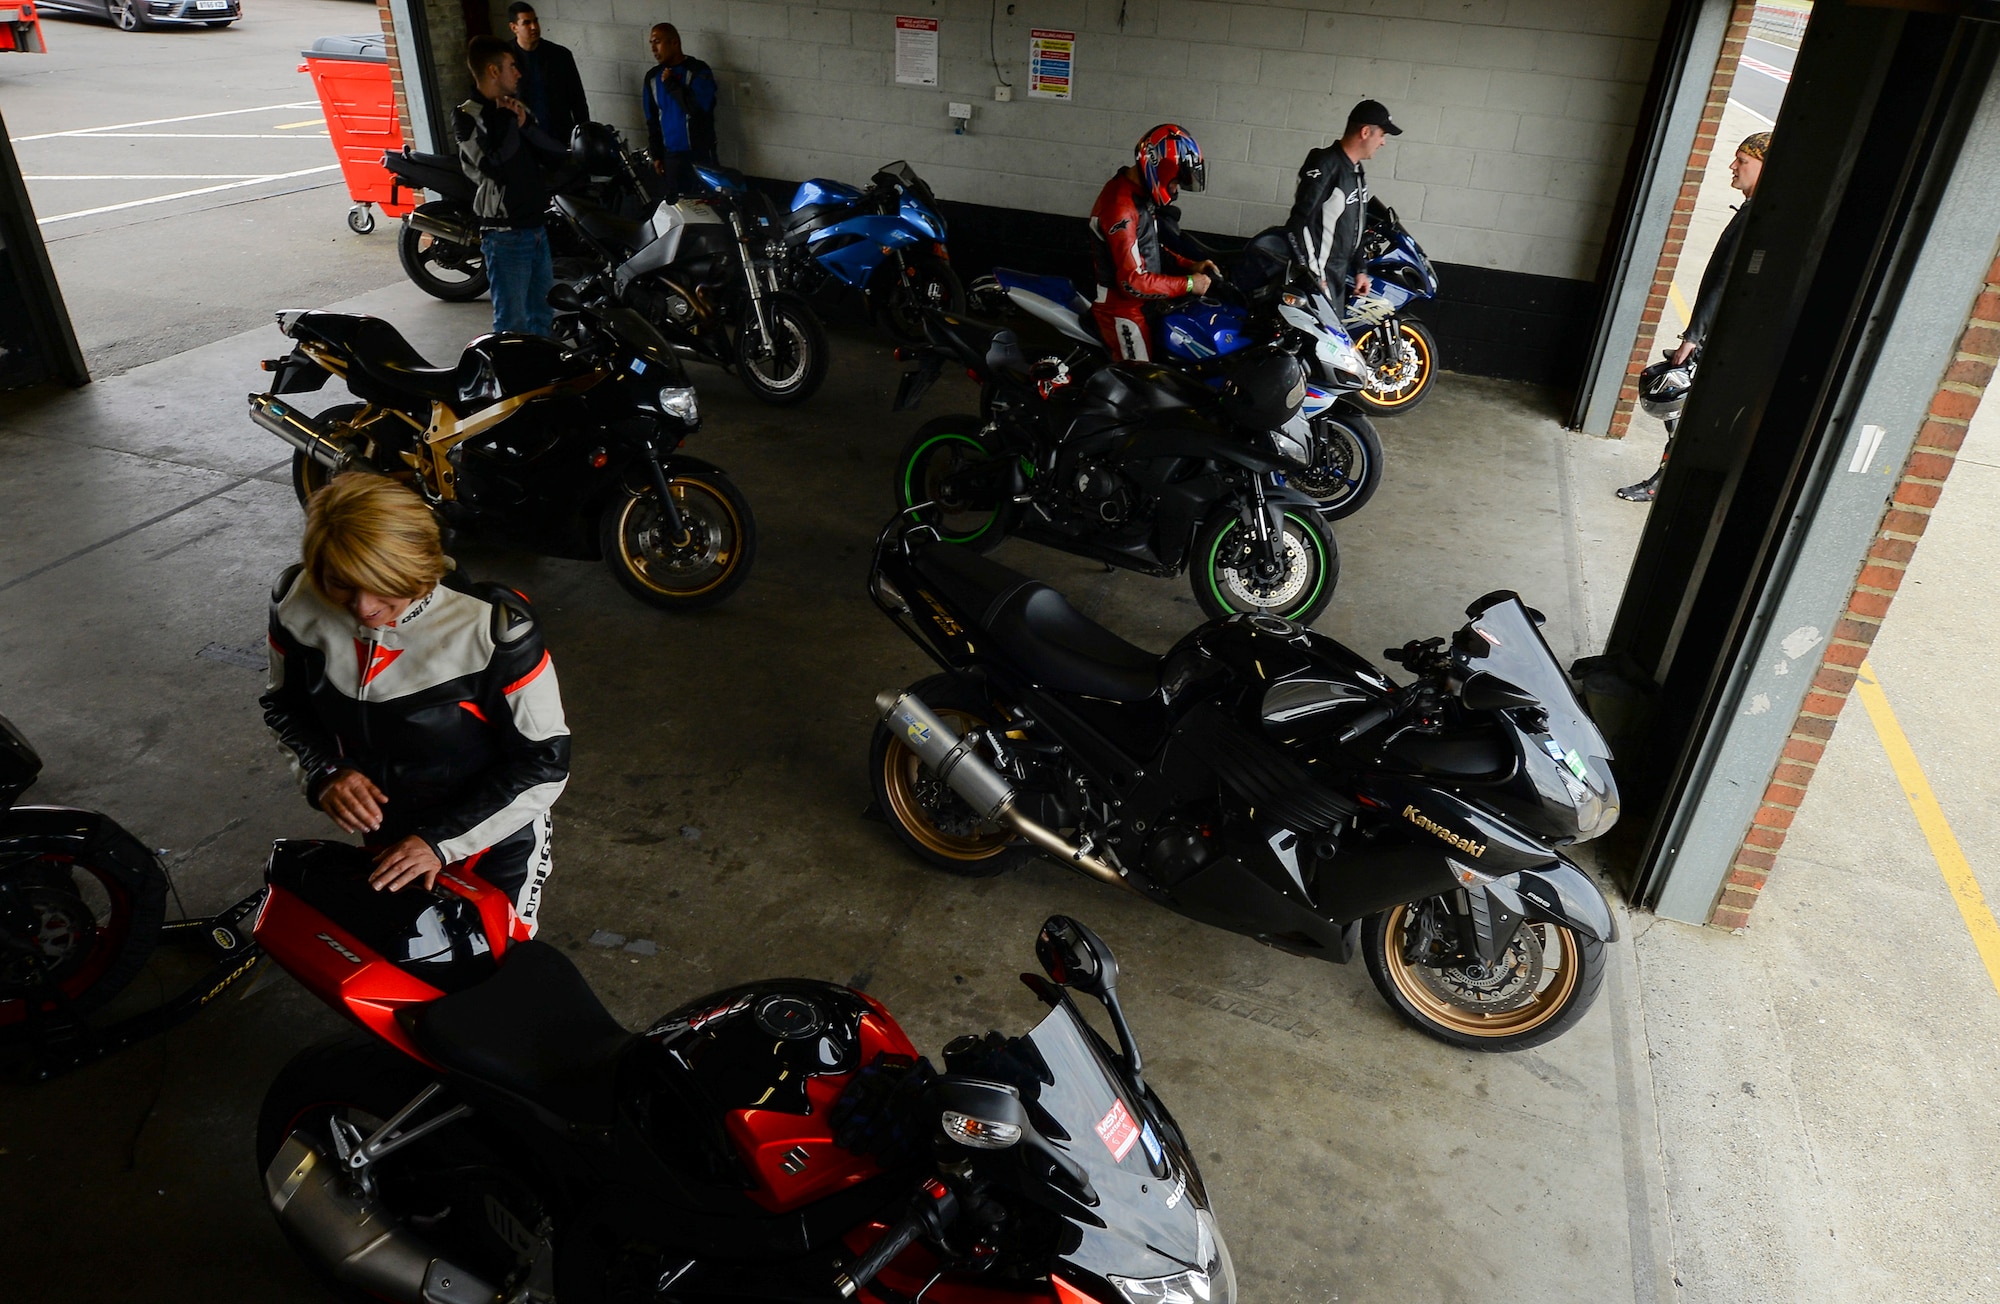 Participants in the Military Track Day prepare to go out on the track July 26, 2016, at Snetterton Circuit in Norwich, England. The event was open to U.S. military members, retirees, dependents, U.S. and Ministry of Defence civilians. (U.S. Air Force photo by Staff Sgt. Micaiah Anthony)